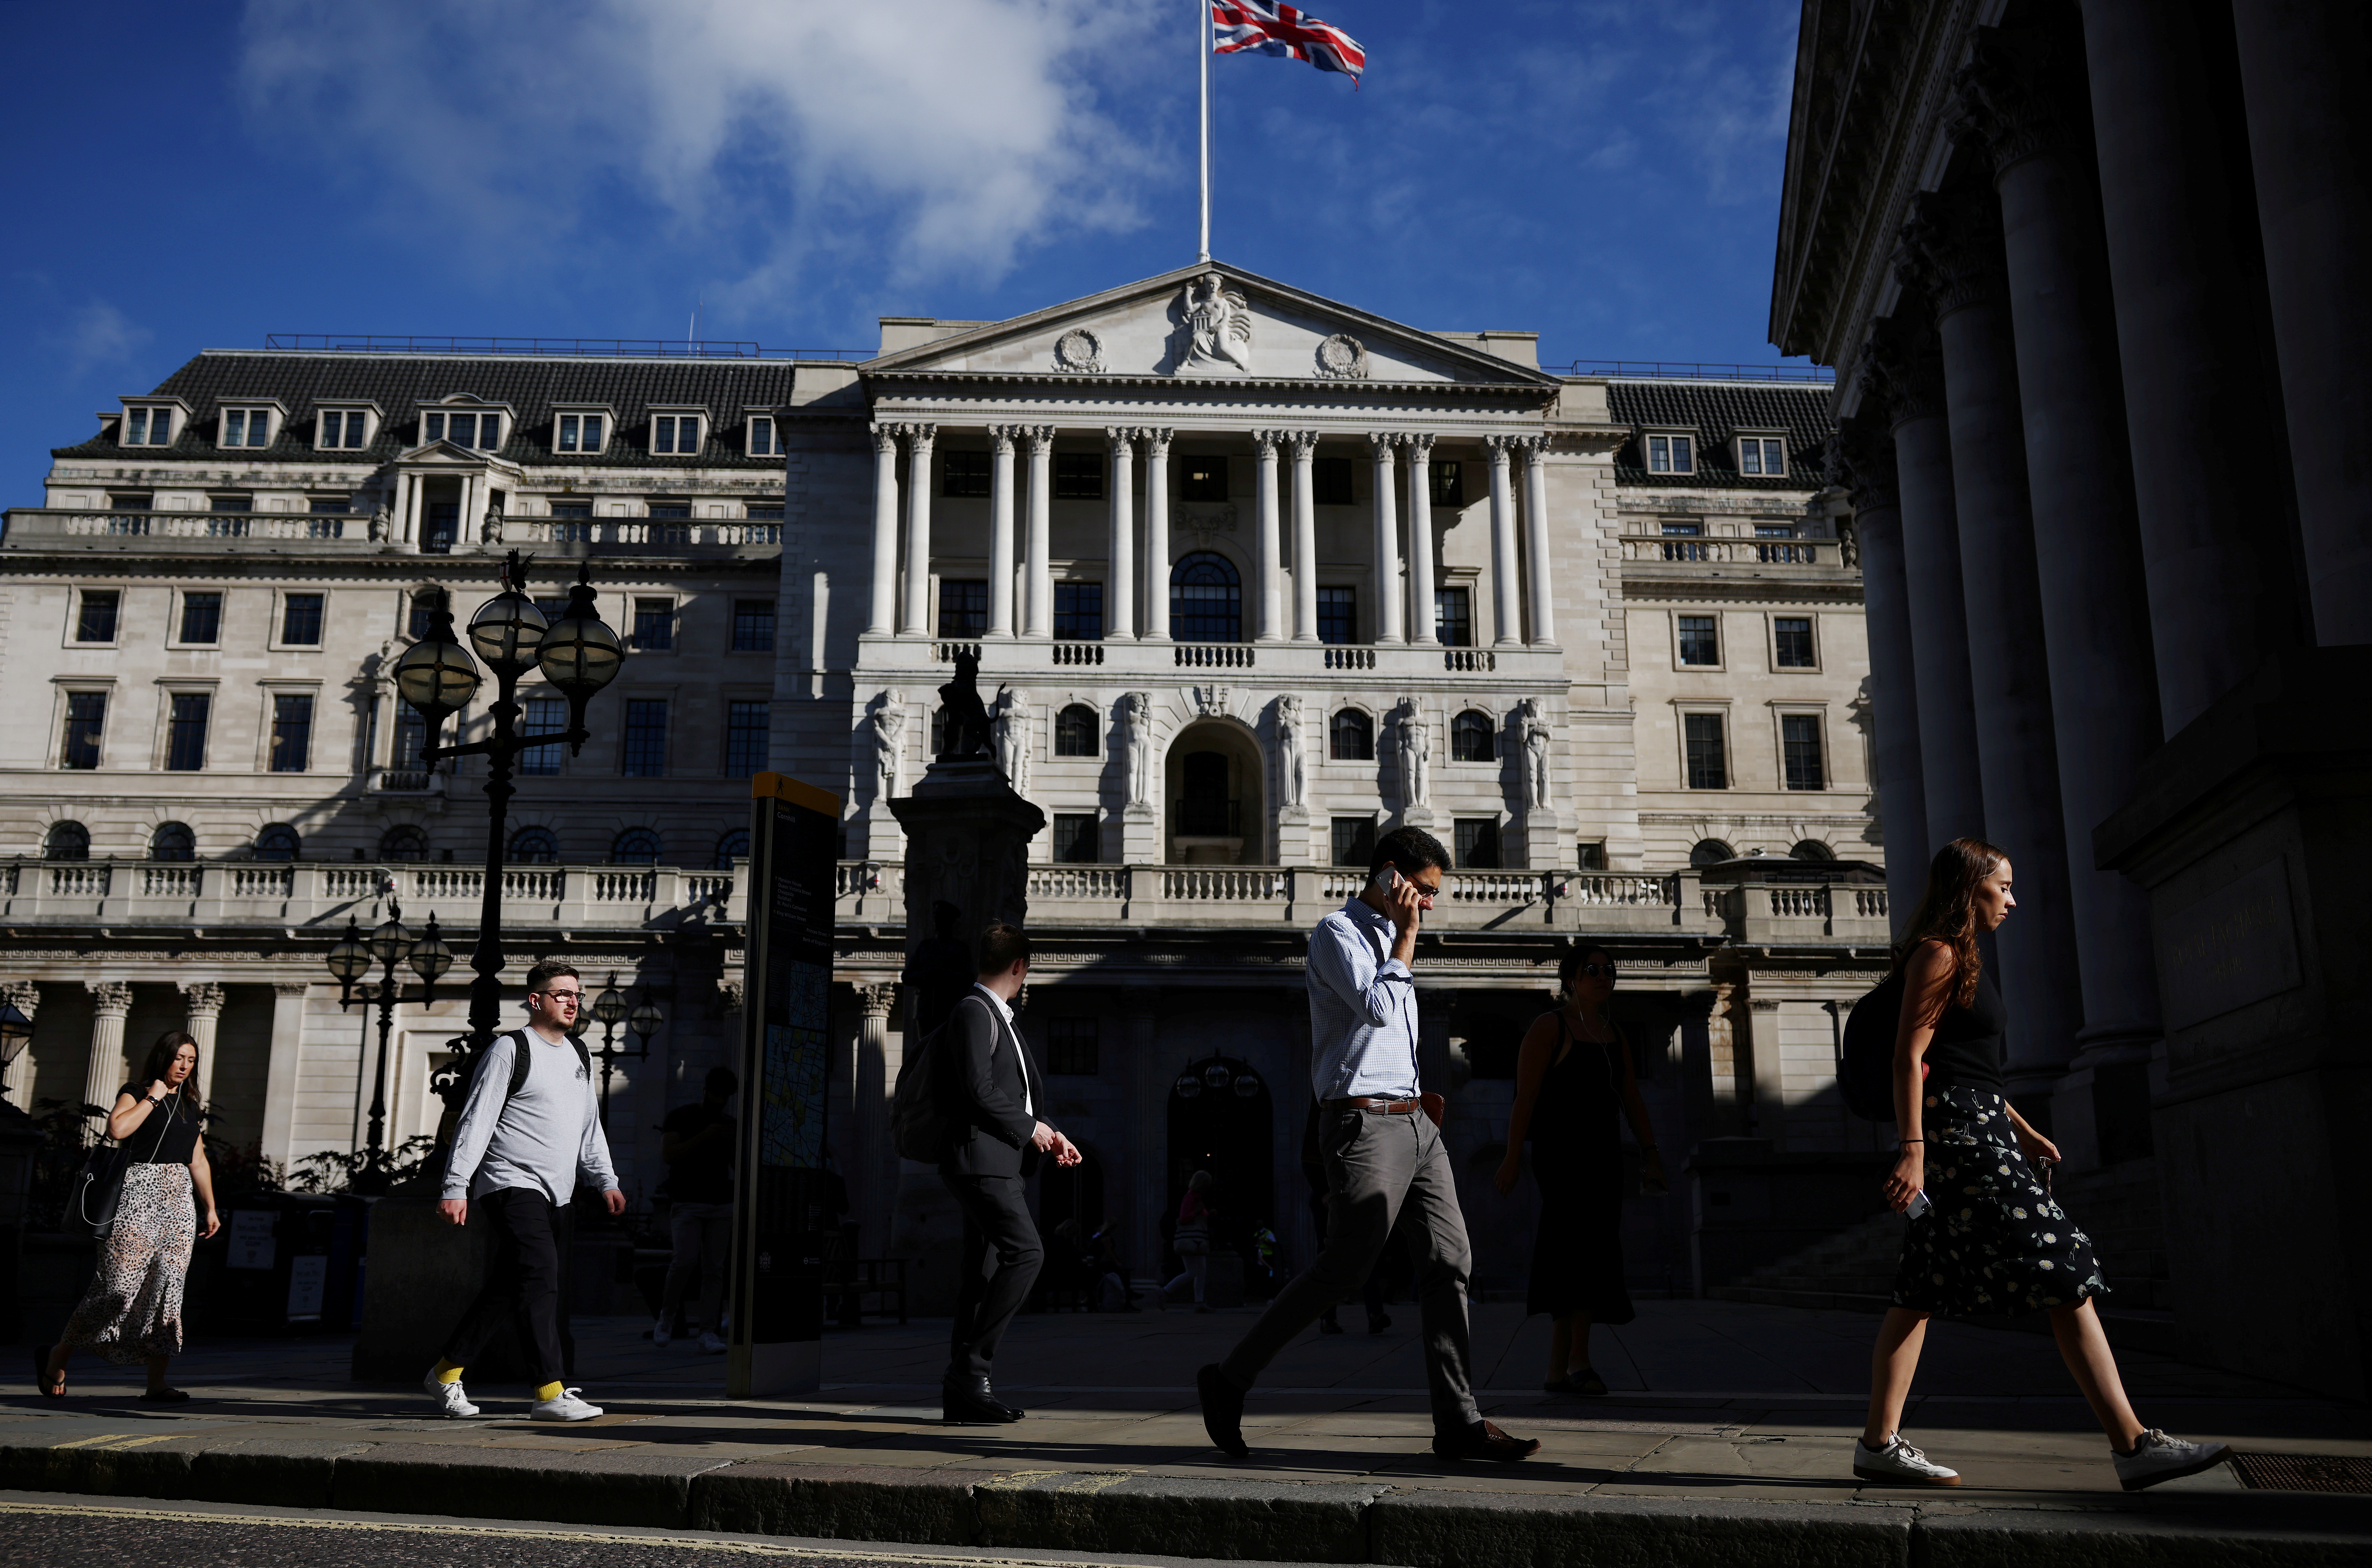 People walk past the Bank of England during morning rush hour, amid the coronavirus disease (COVID-19) pandemic in London, Britain, July 29, 2021. REUTERS/Henry Nicholls